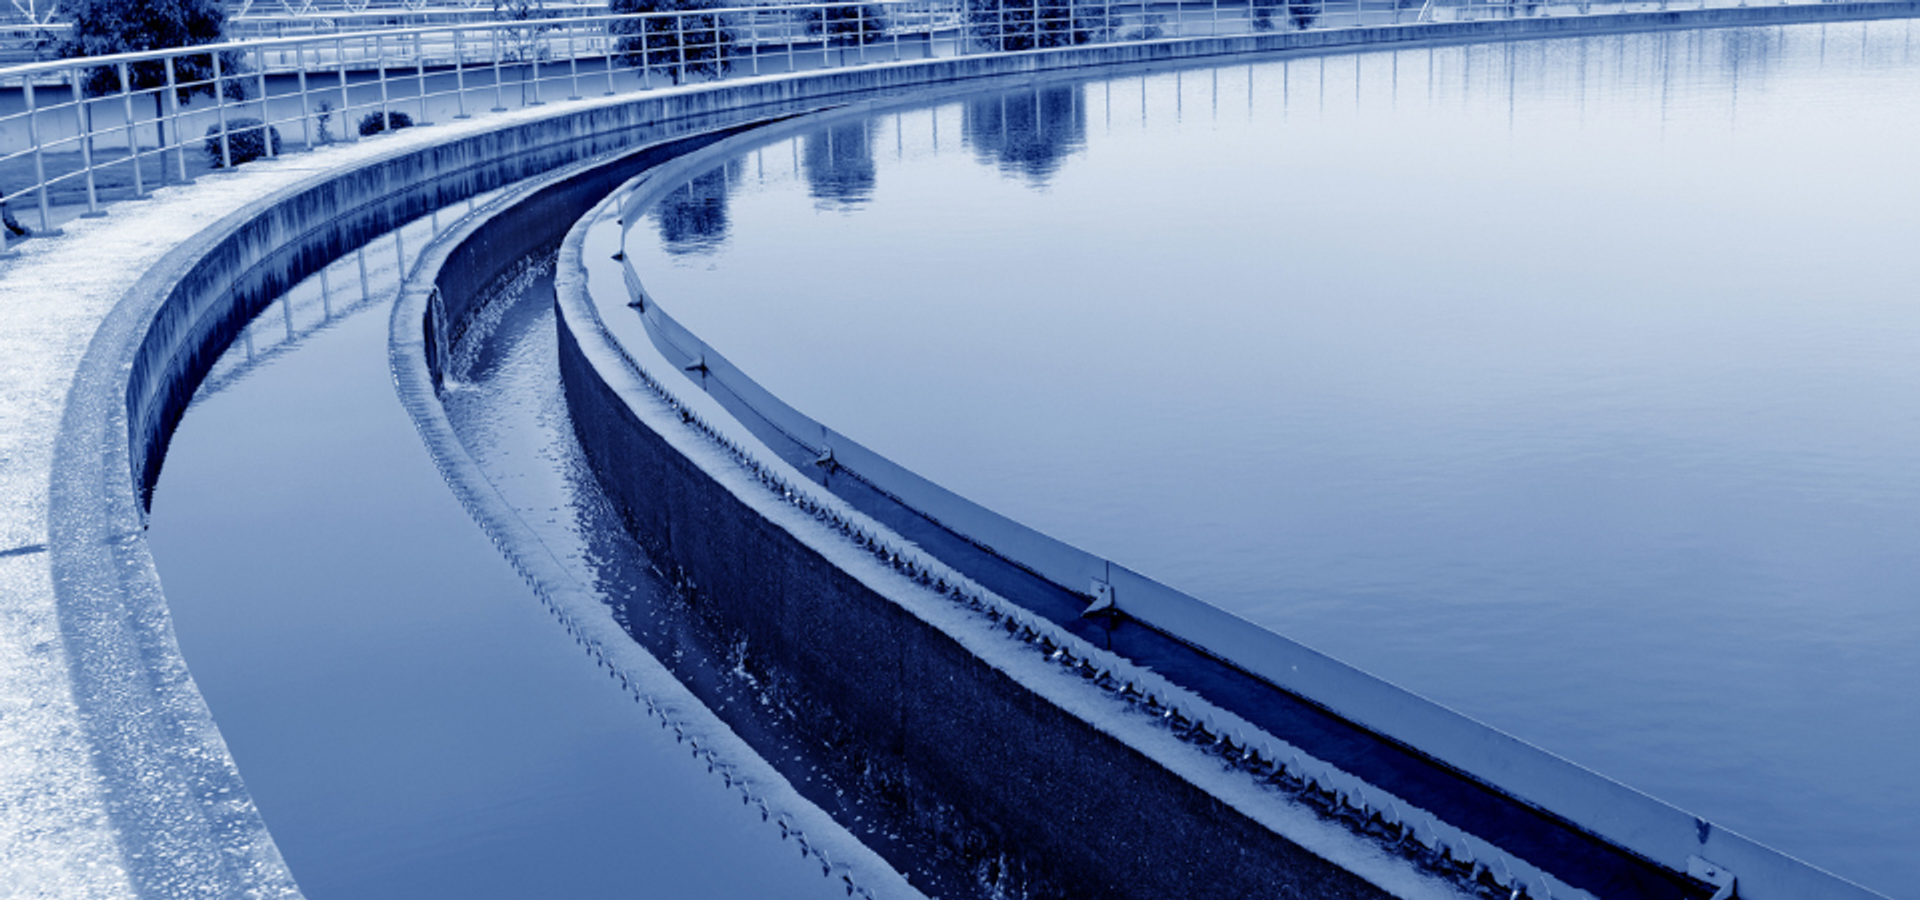 New Family of Products for Municipal/Industrial Wastewater Treatment